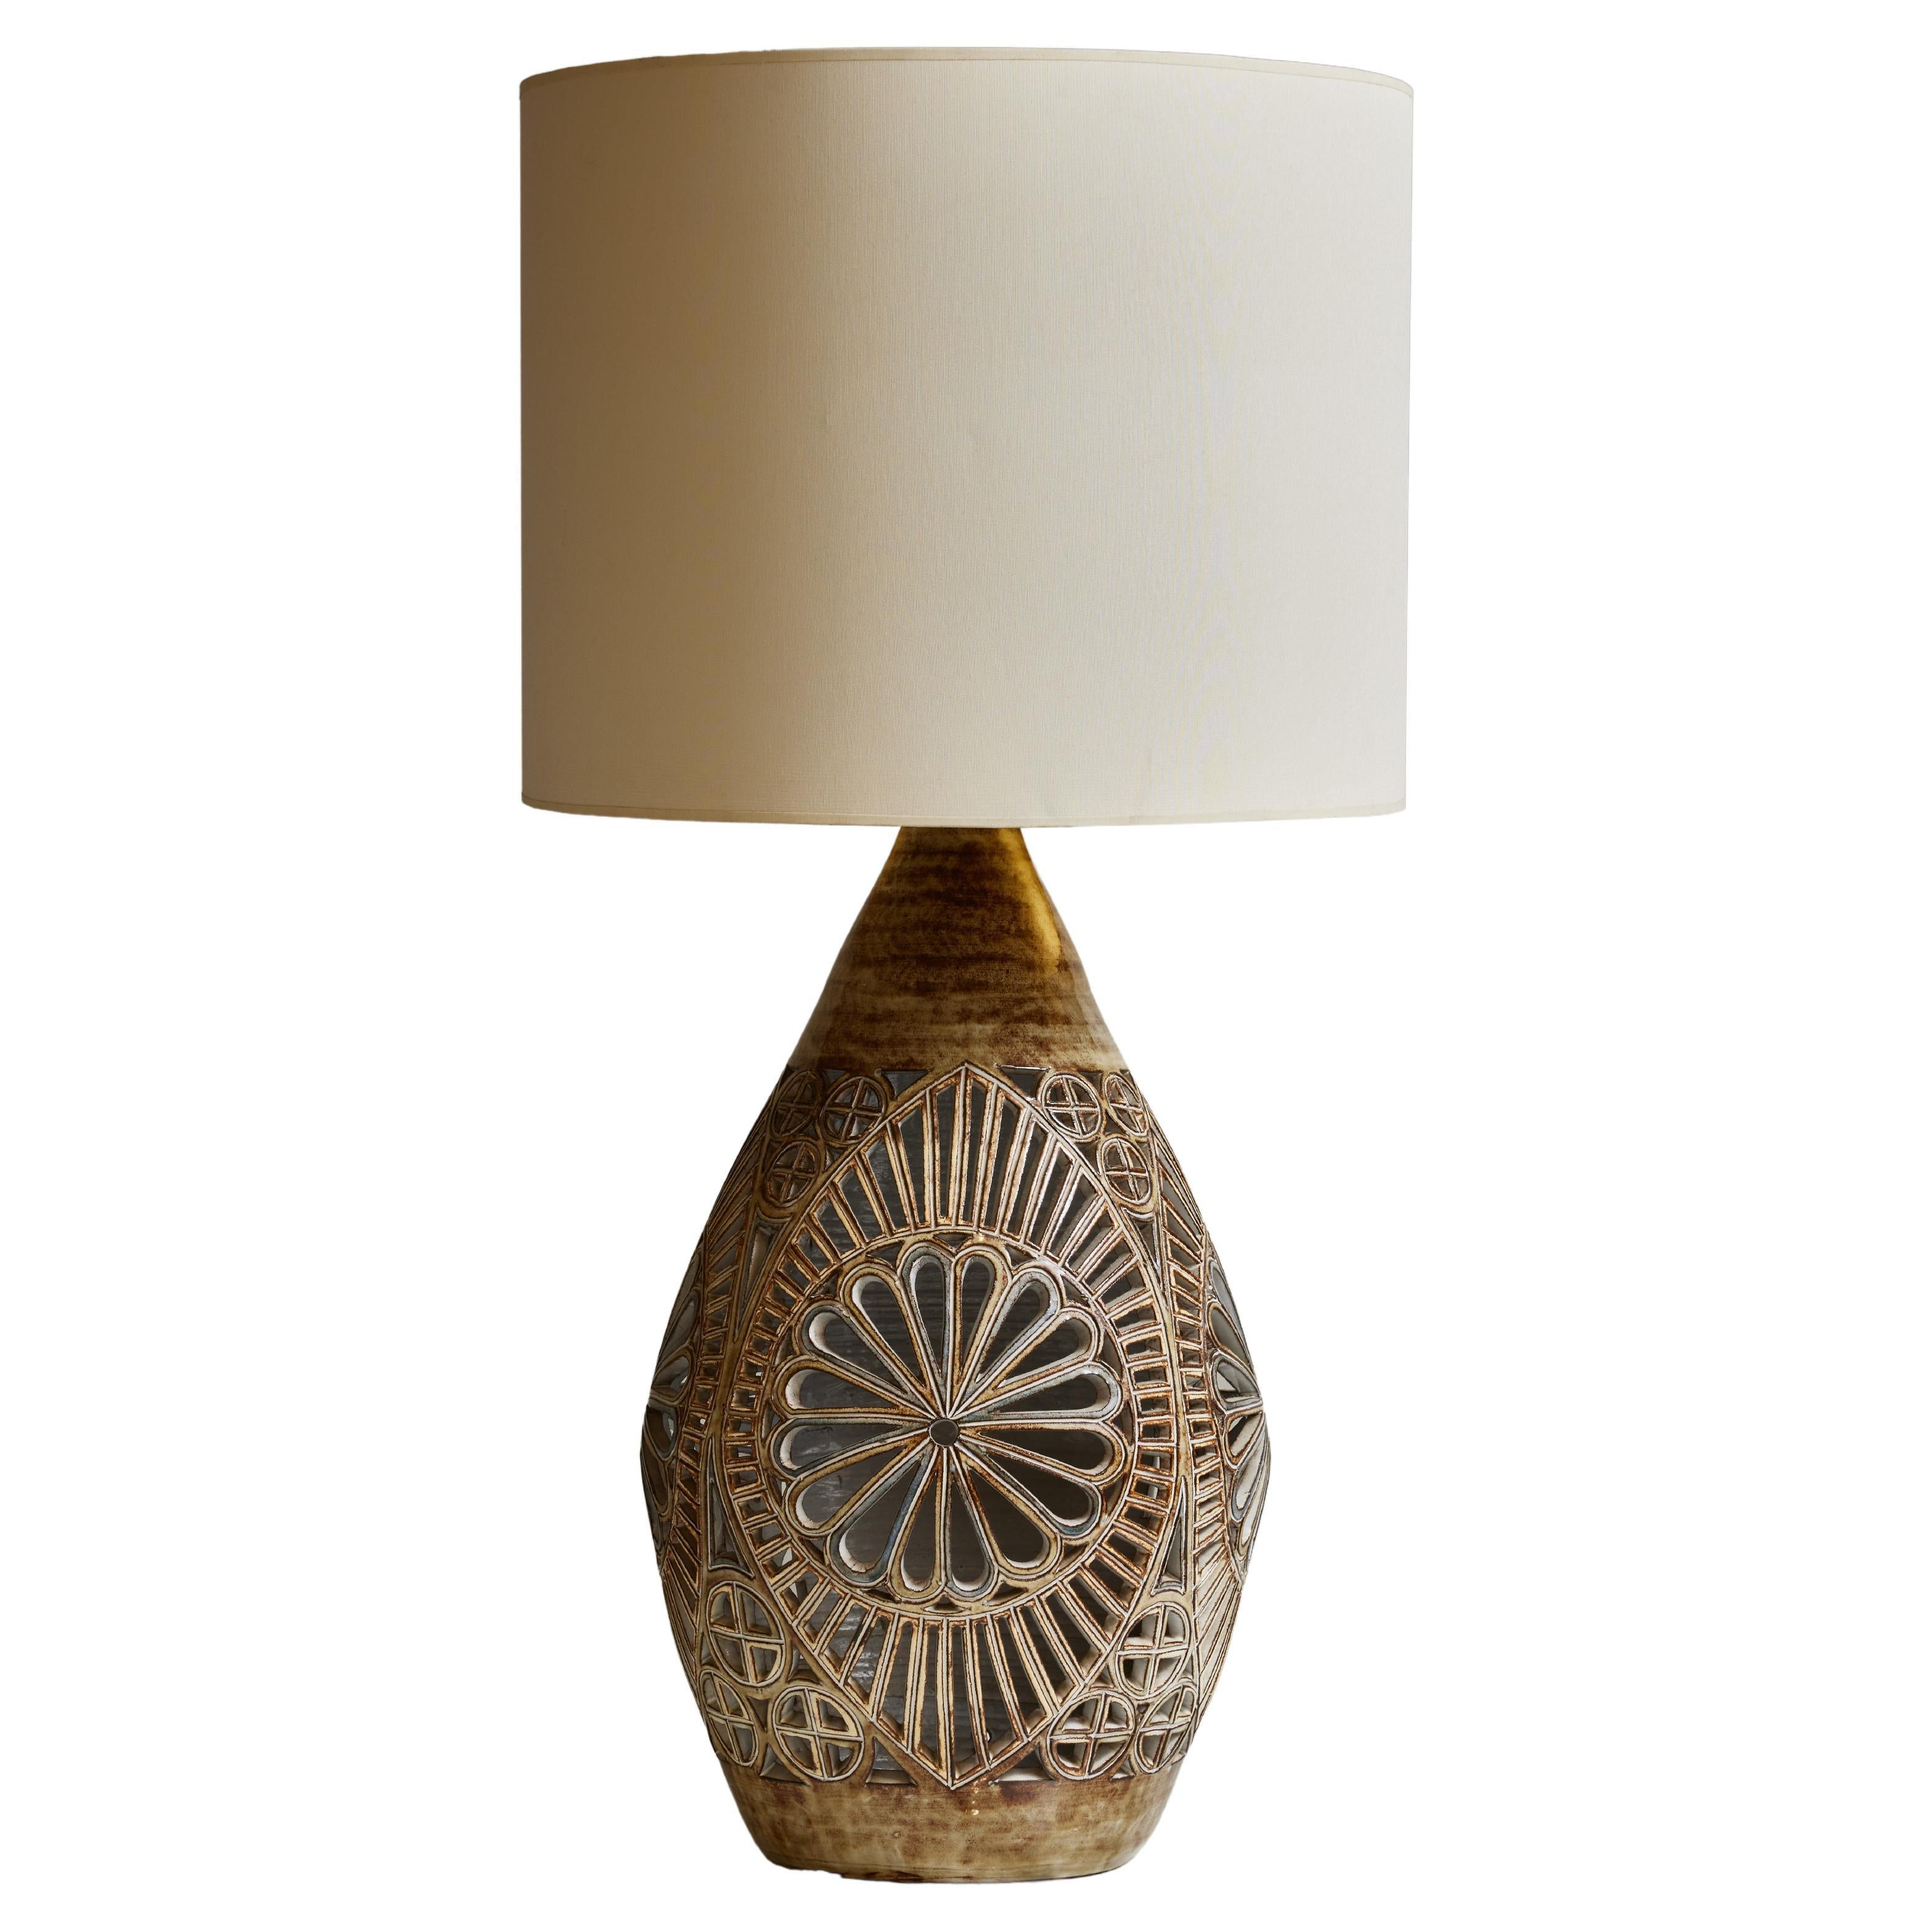 Imposing Ceramic Table Lamp by Robert Perot For Sale